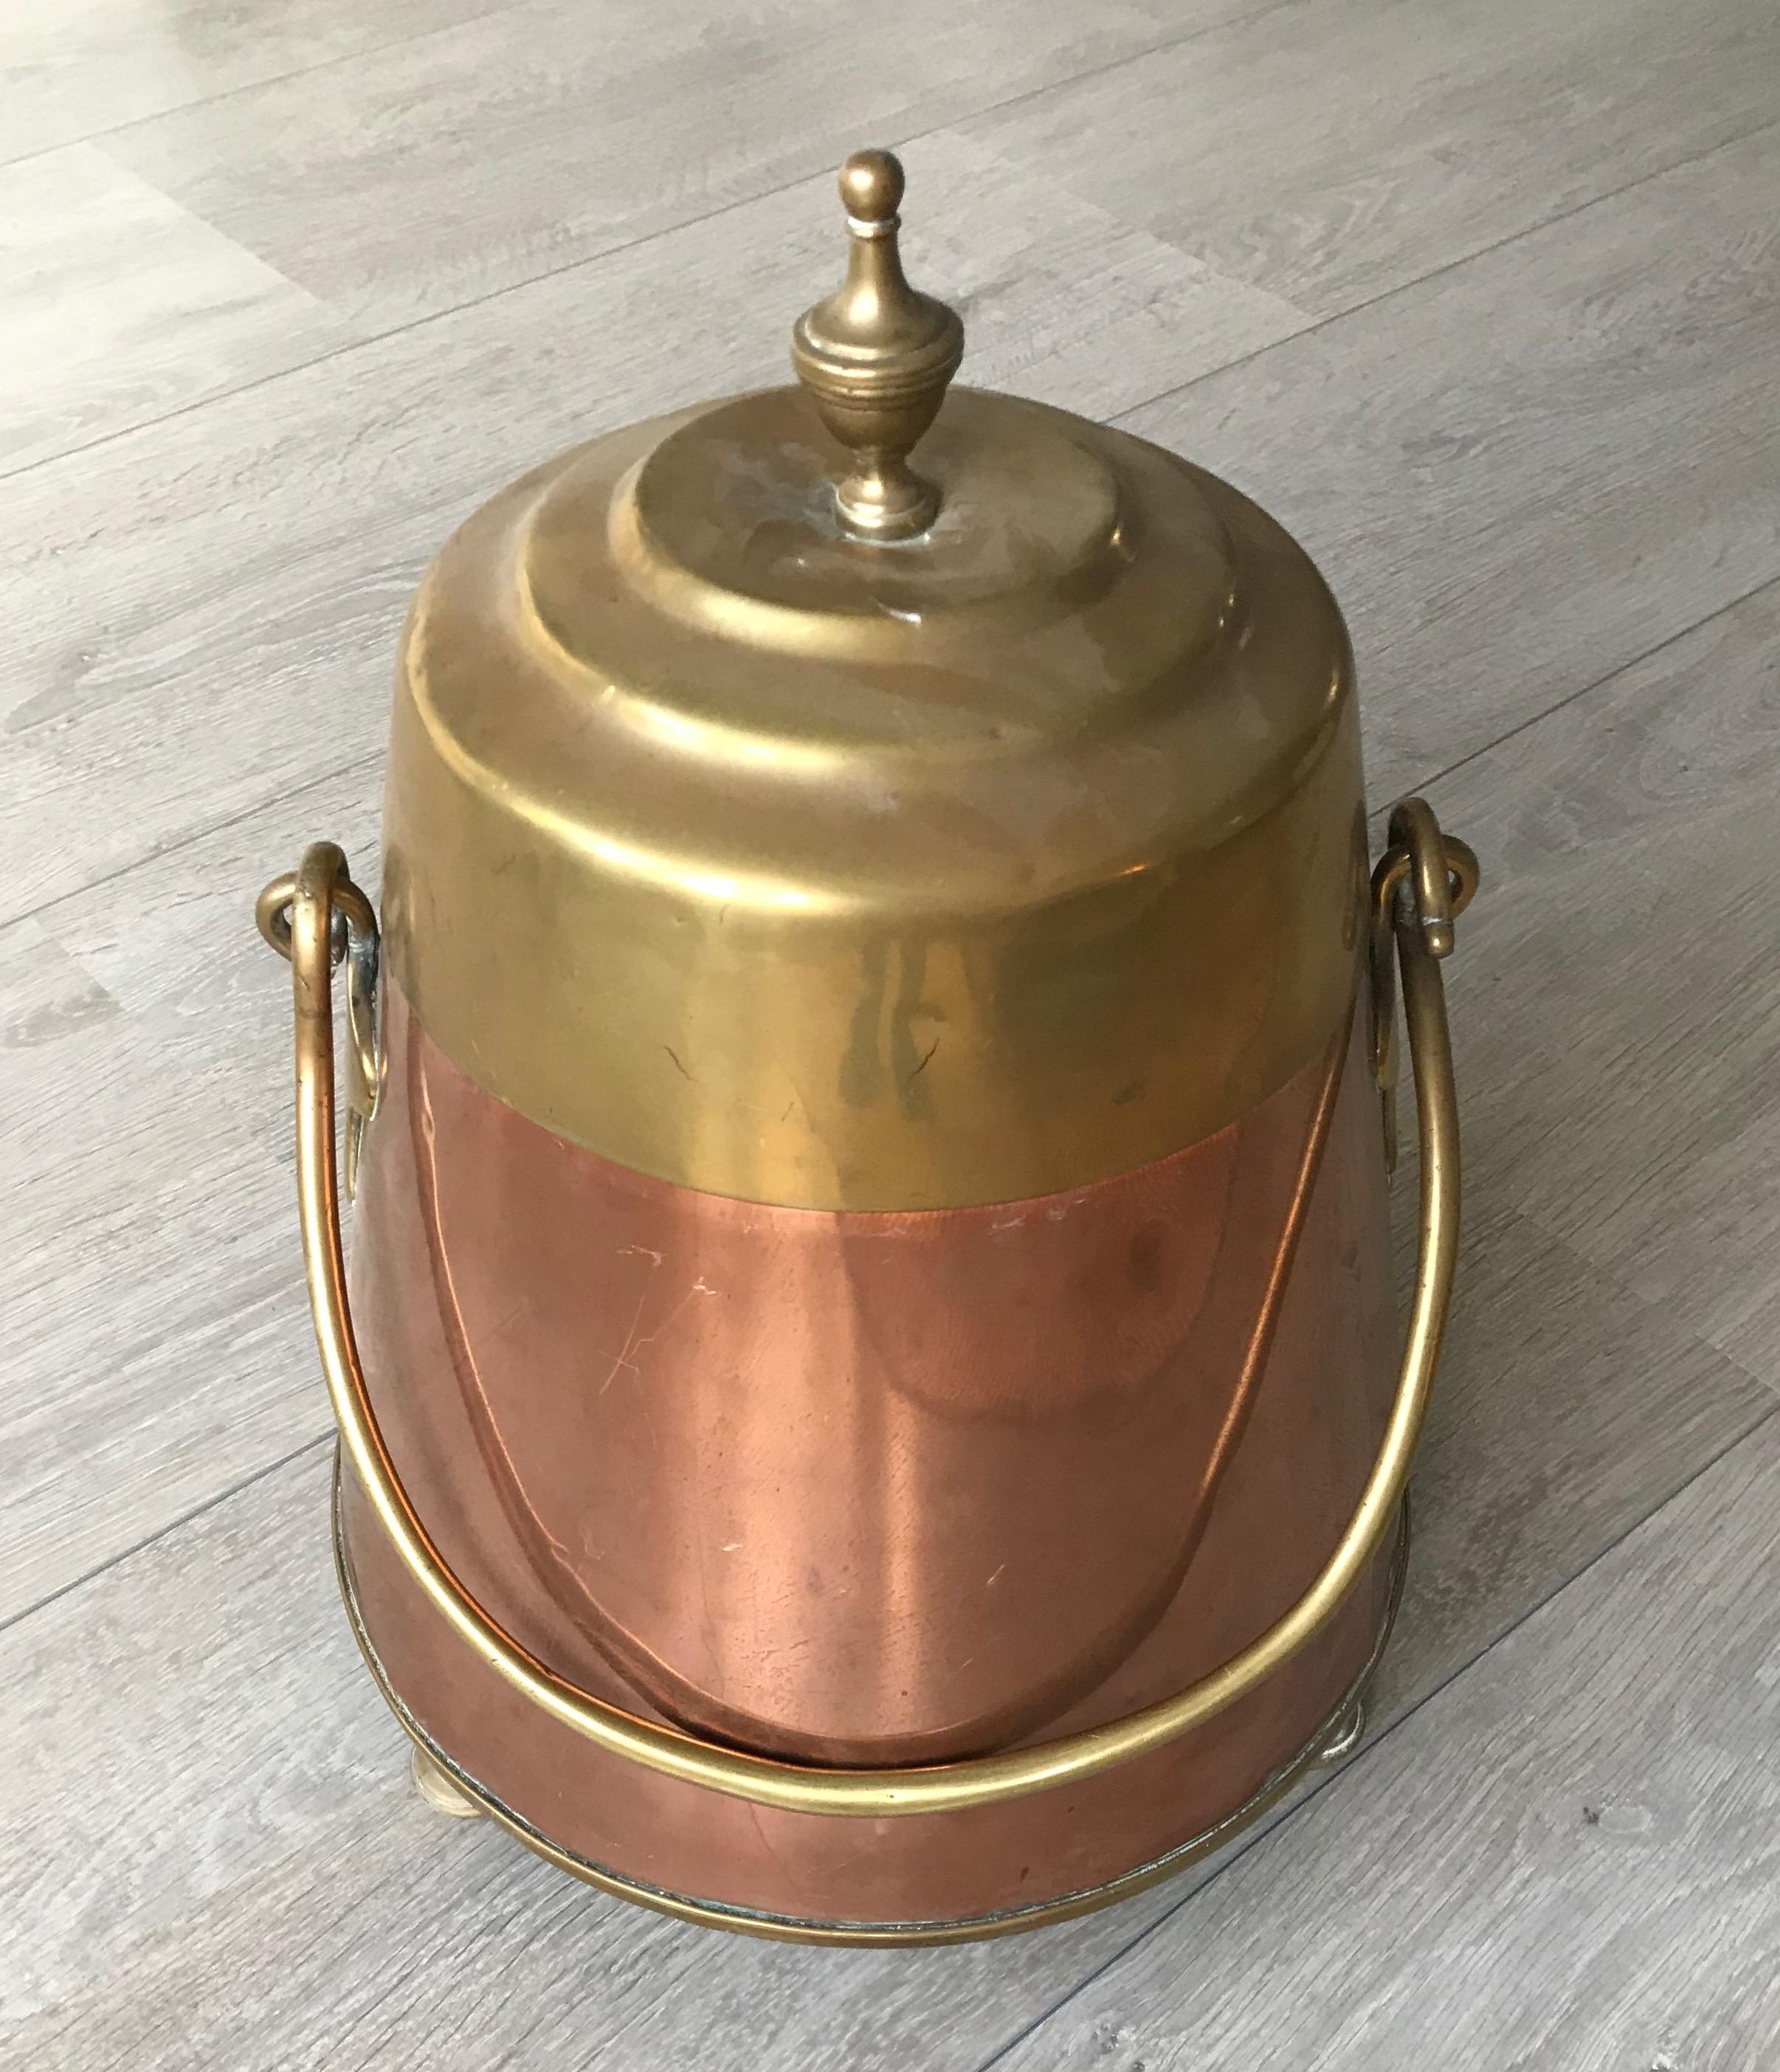 Polished Antique Stylish Copper and Brass Coal Kettle, Fire Extinguisher Fire Place Decor